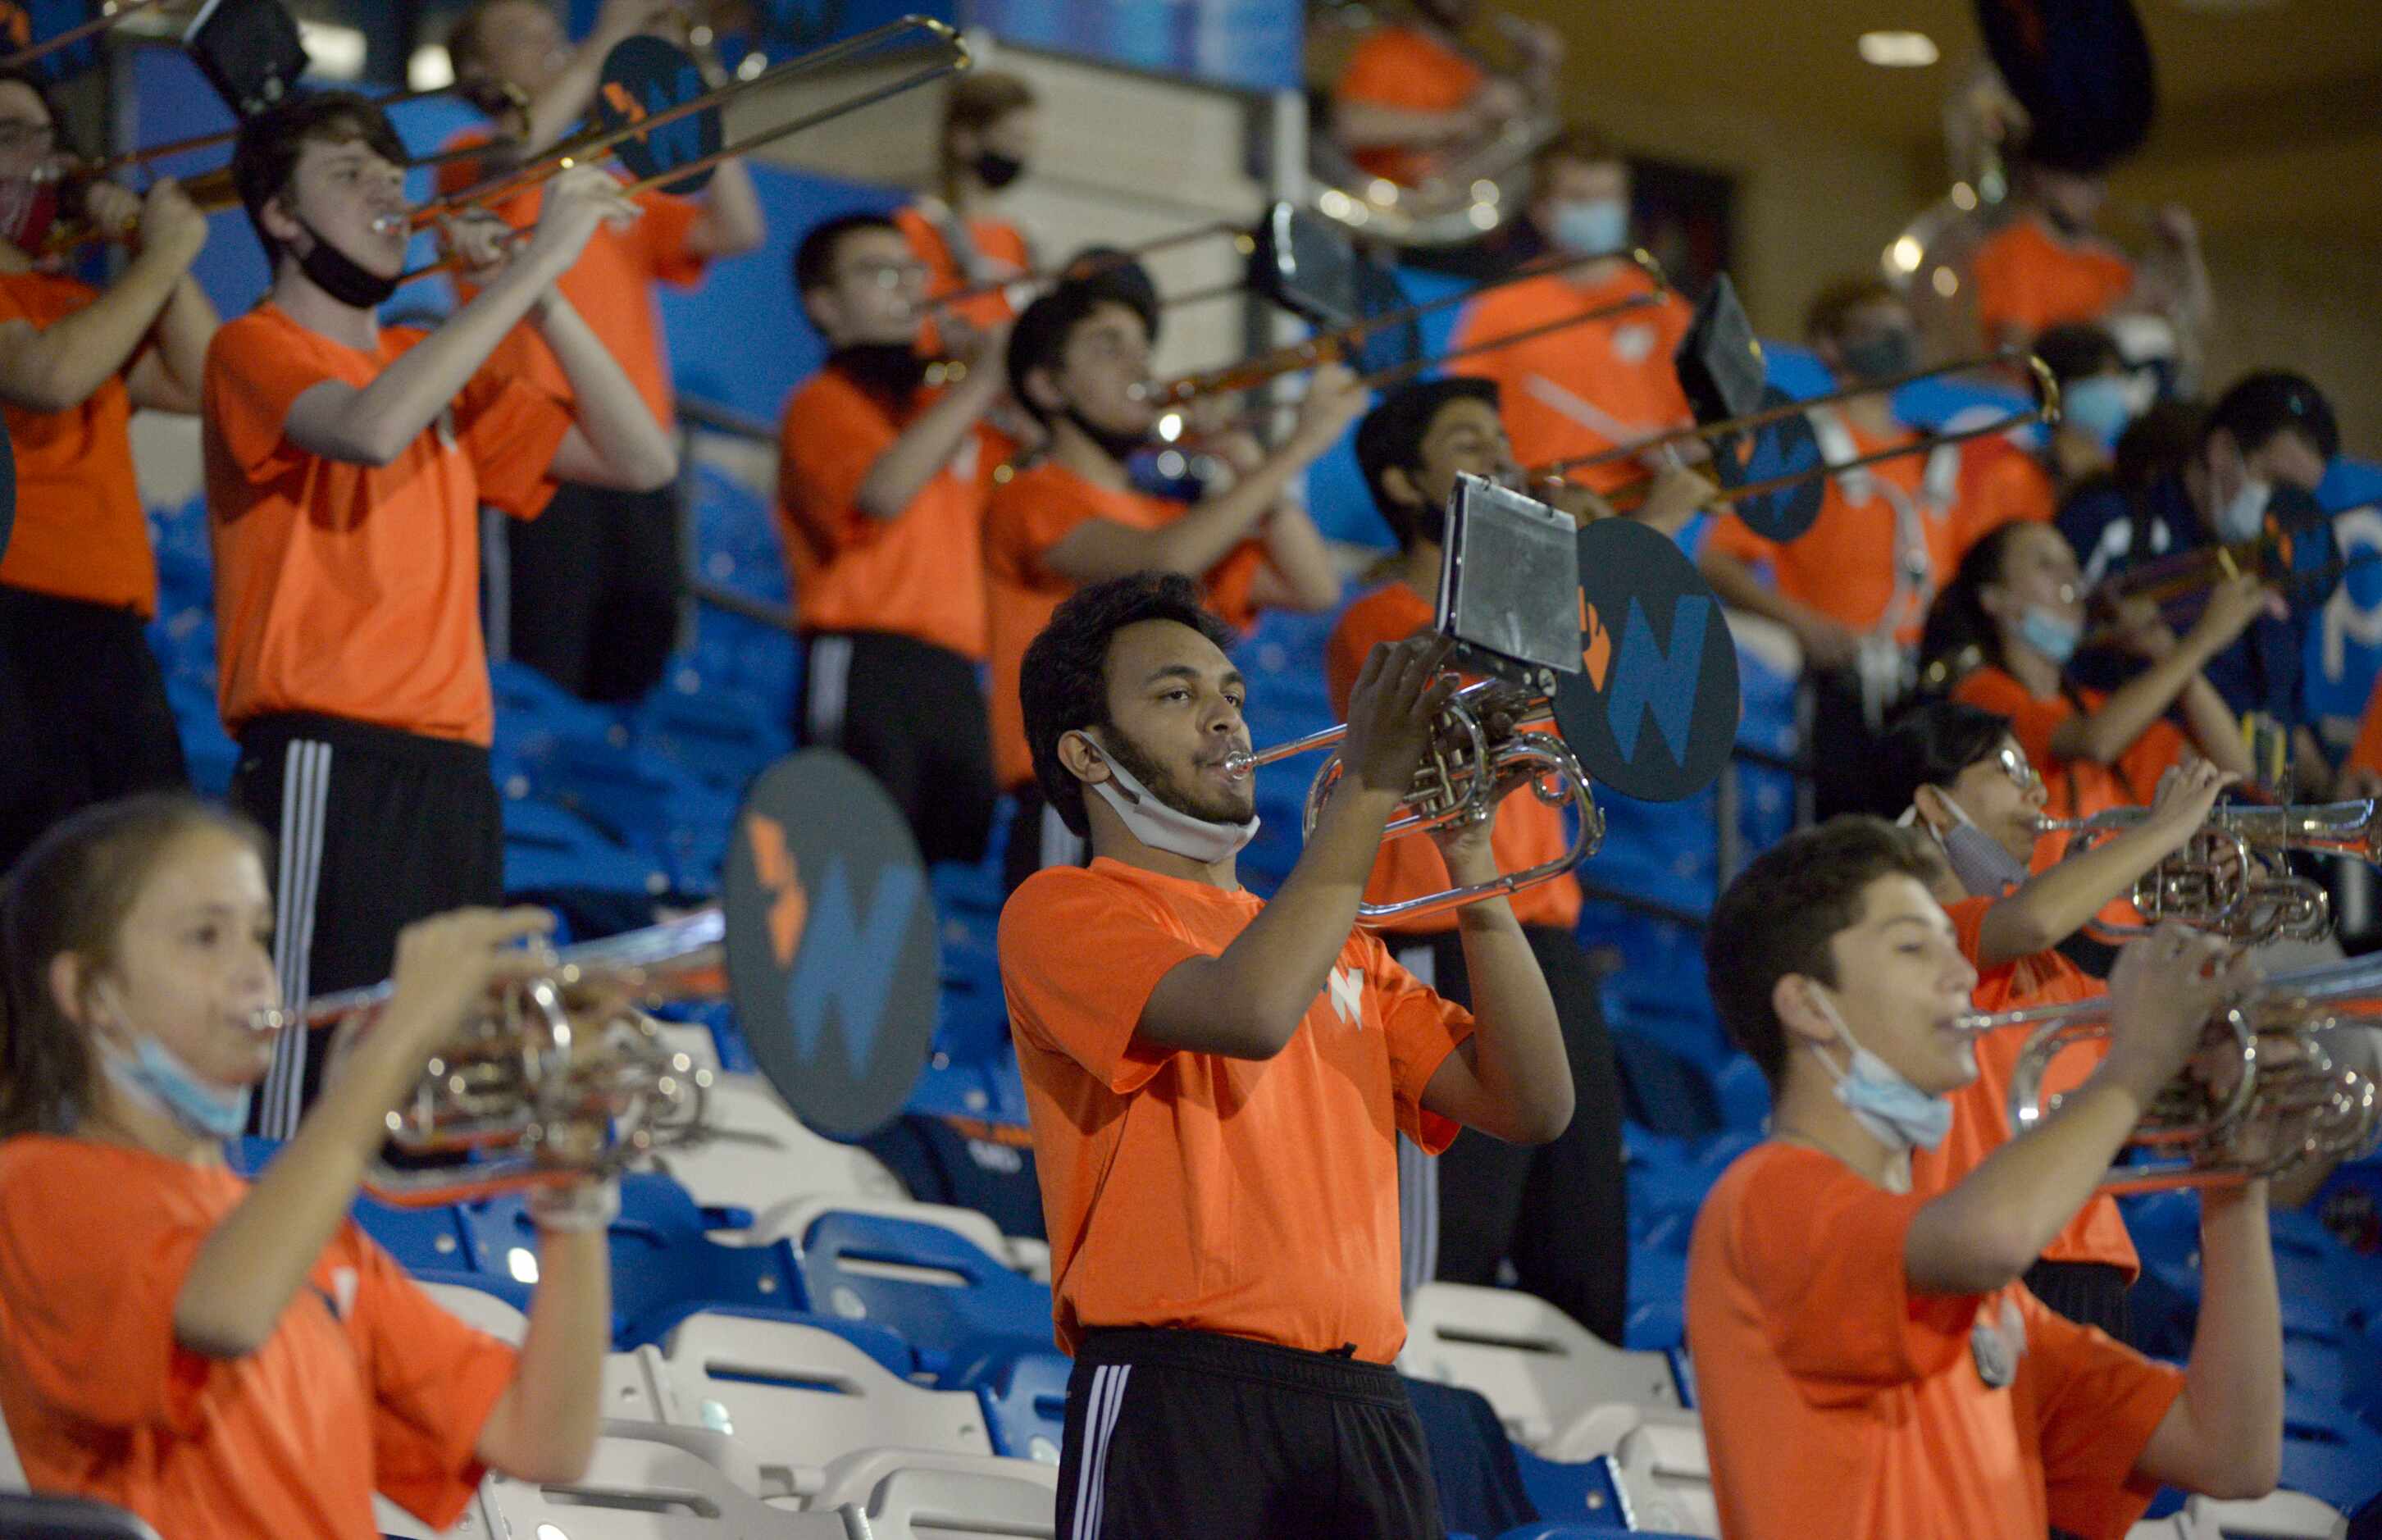 Member’s of the Wakeland band perform in the second quarter of a high school football game...